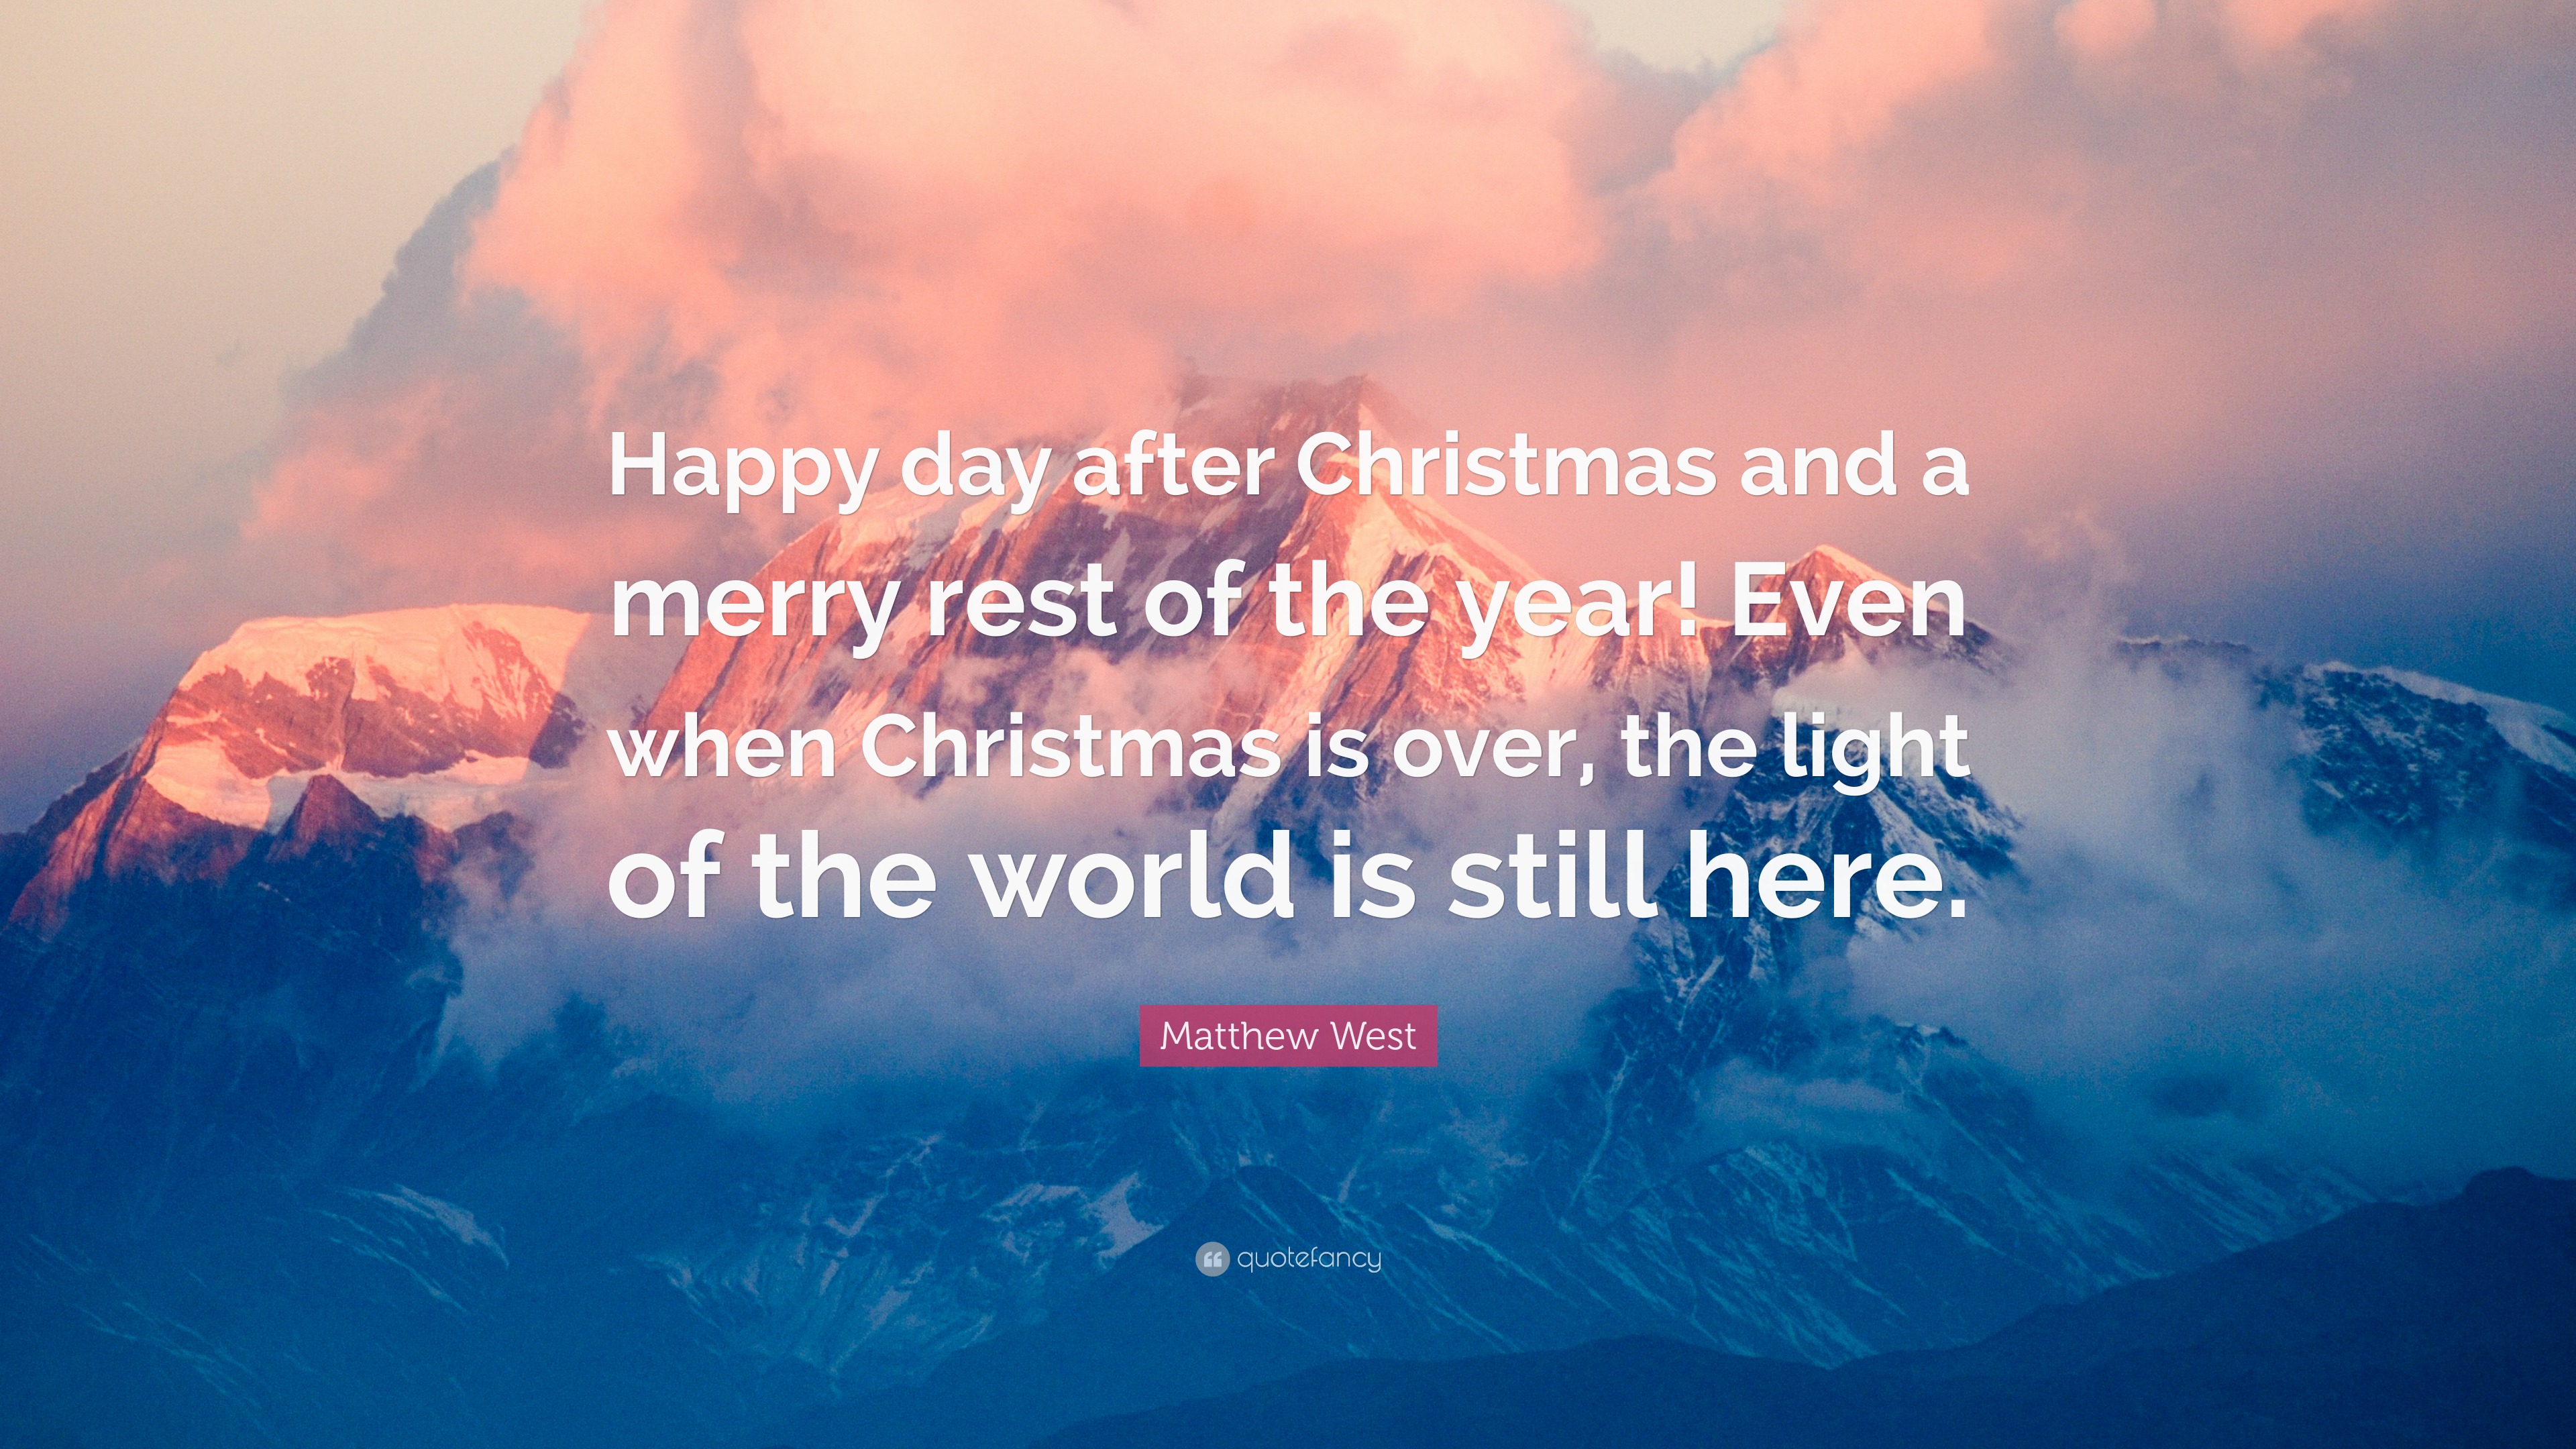 Matthew West Quote: “Happy Day After Christmas, Merry Rest of the Year, even when Christmas is ...